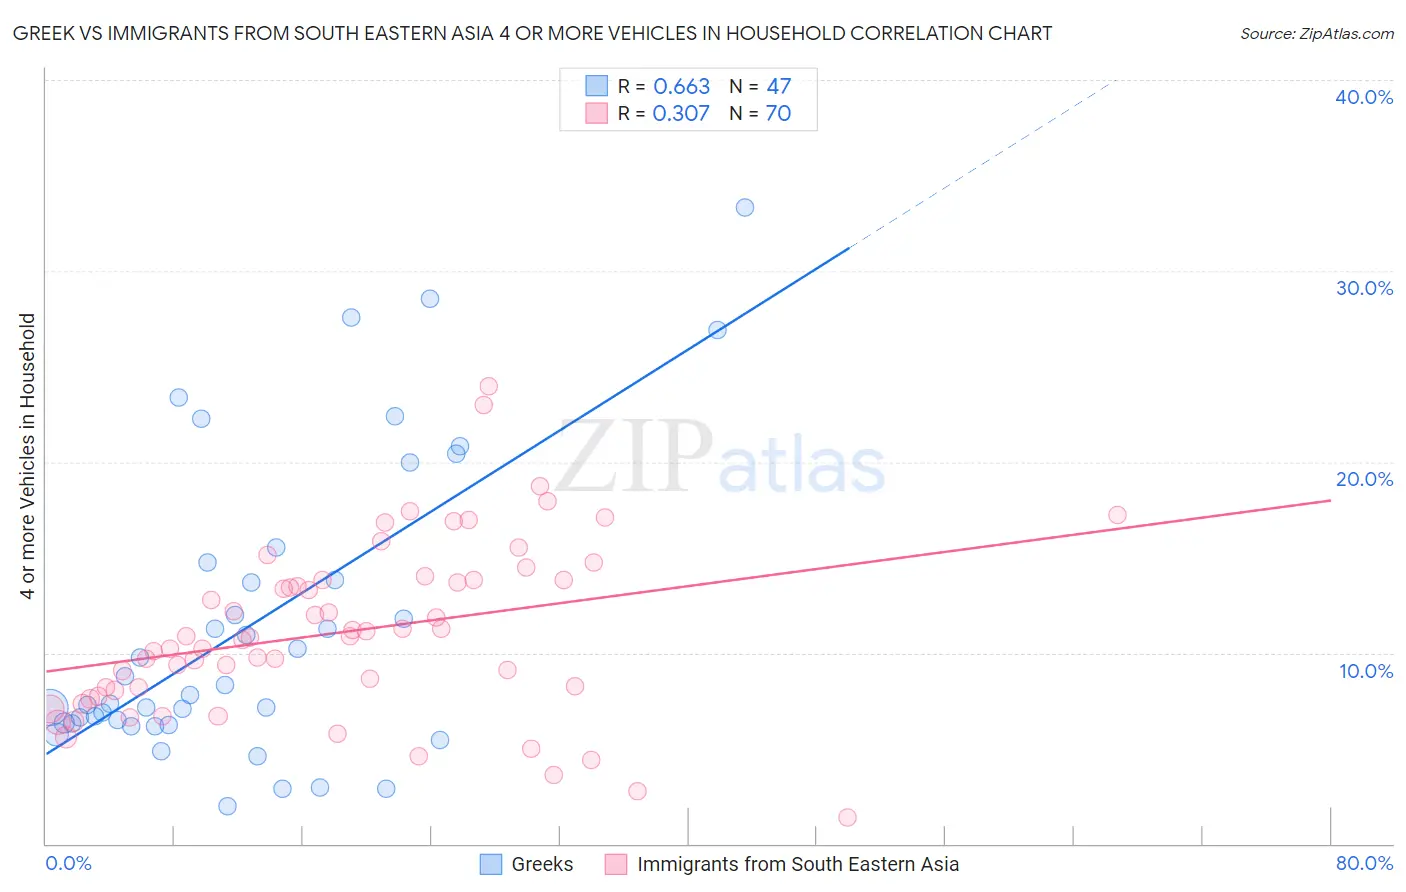 Greek vs Immigrants from South Eastern Asia 4 or more Vehicles in Household